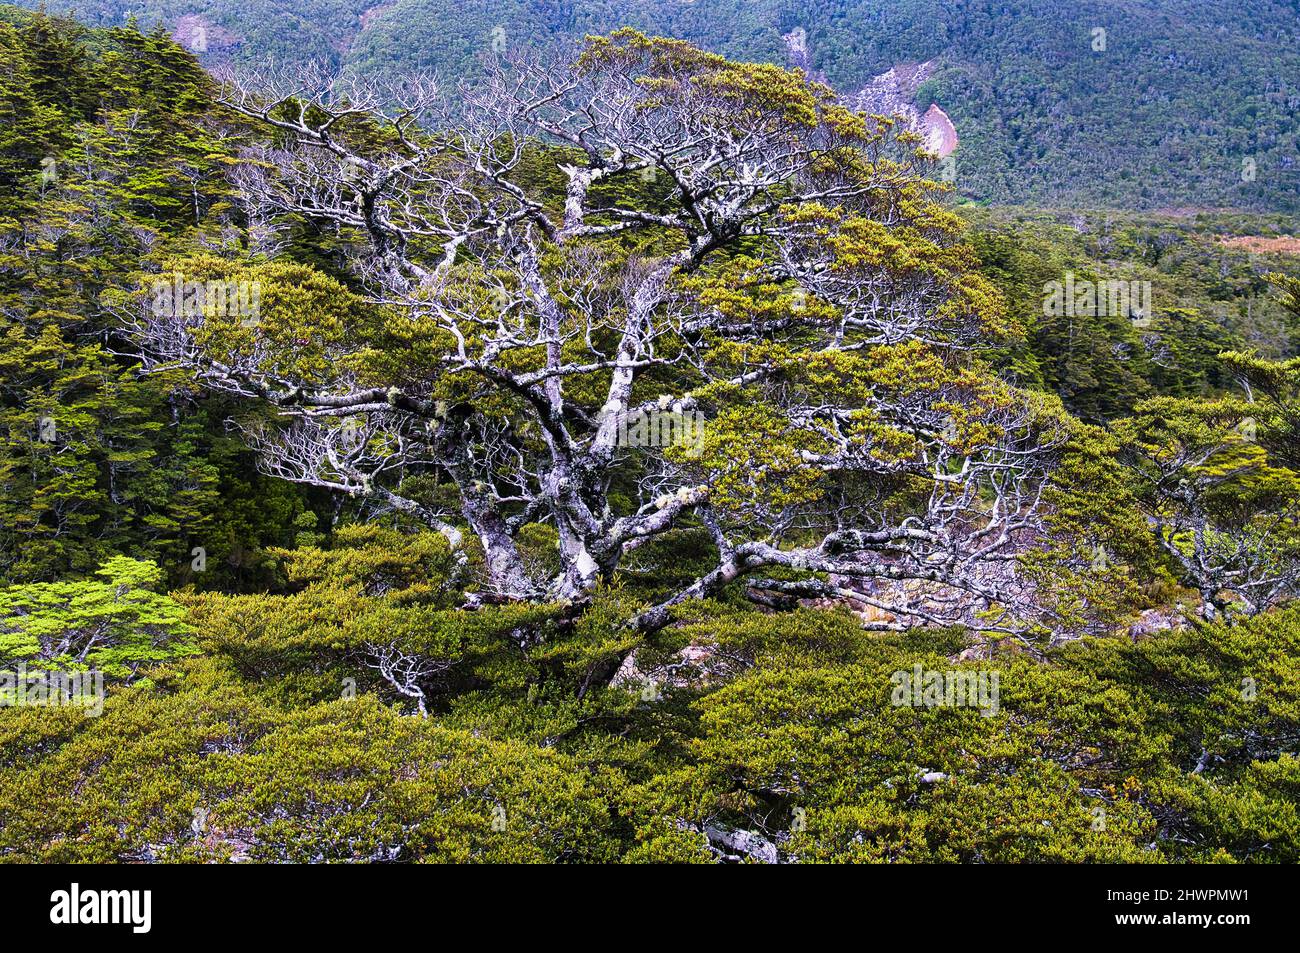 Gnarled old mountain beech tree (Nothofagus solandri var. cliffortioides) in the alpine forest of Mount Ruapehu, North Island, New Zealand Stock Photo